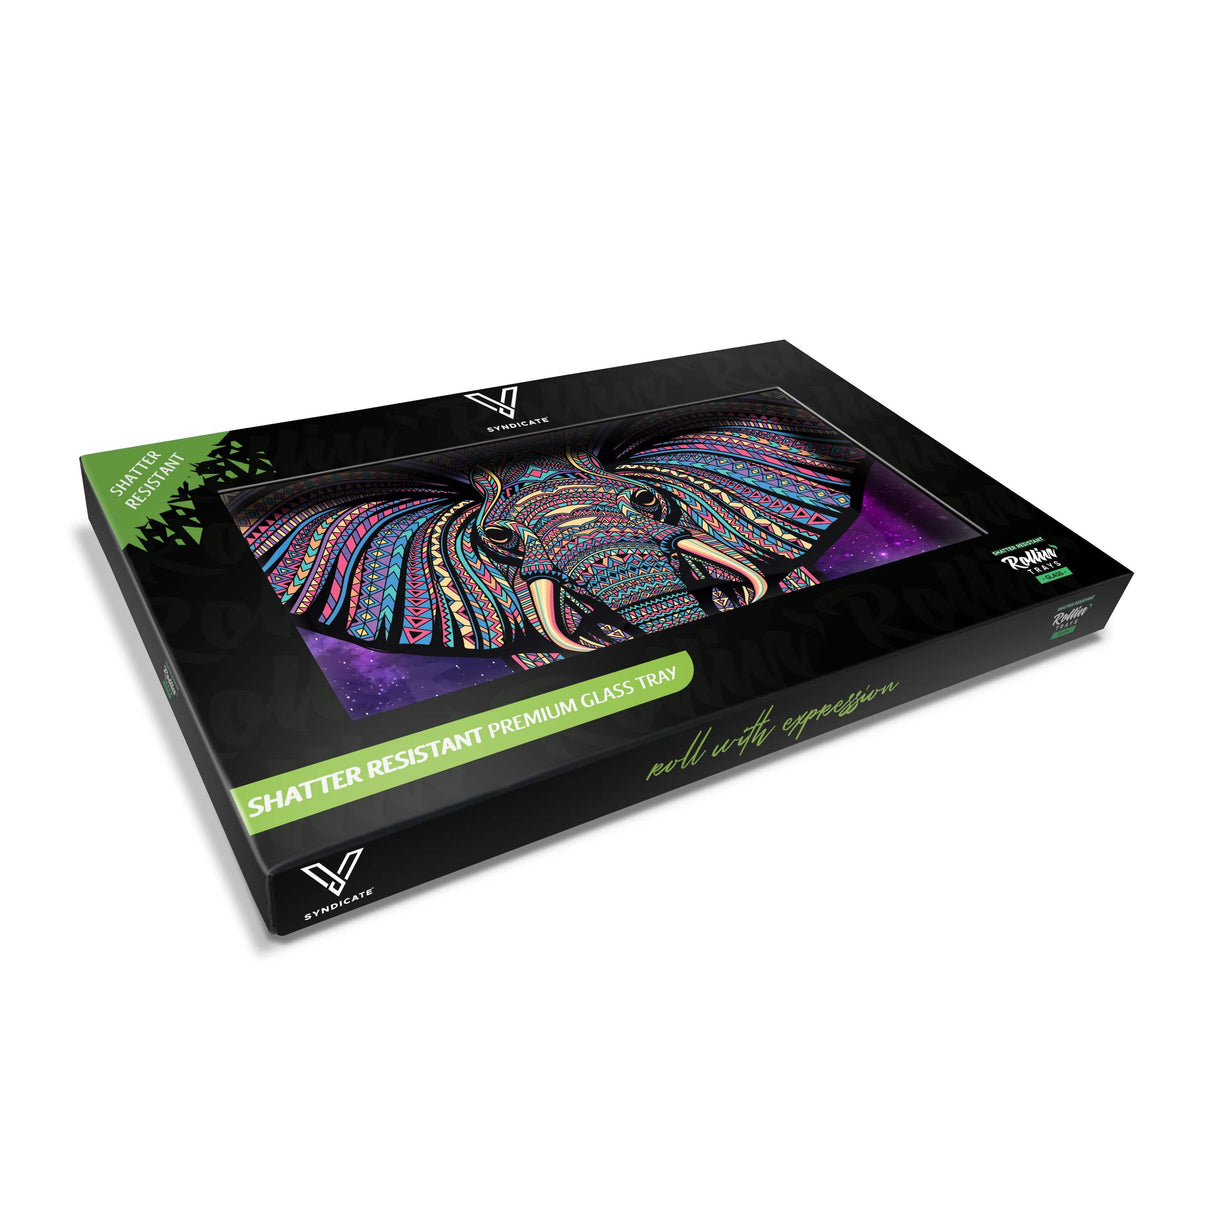 V Syndicate Elephant Glass Rollin' Tray with Colorful Design, Medium Size, Shatter Resistant